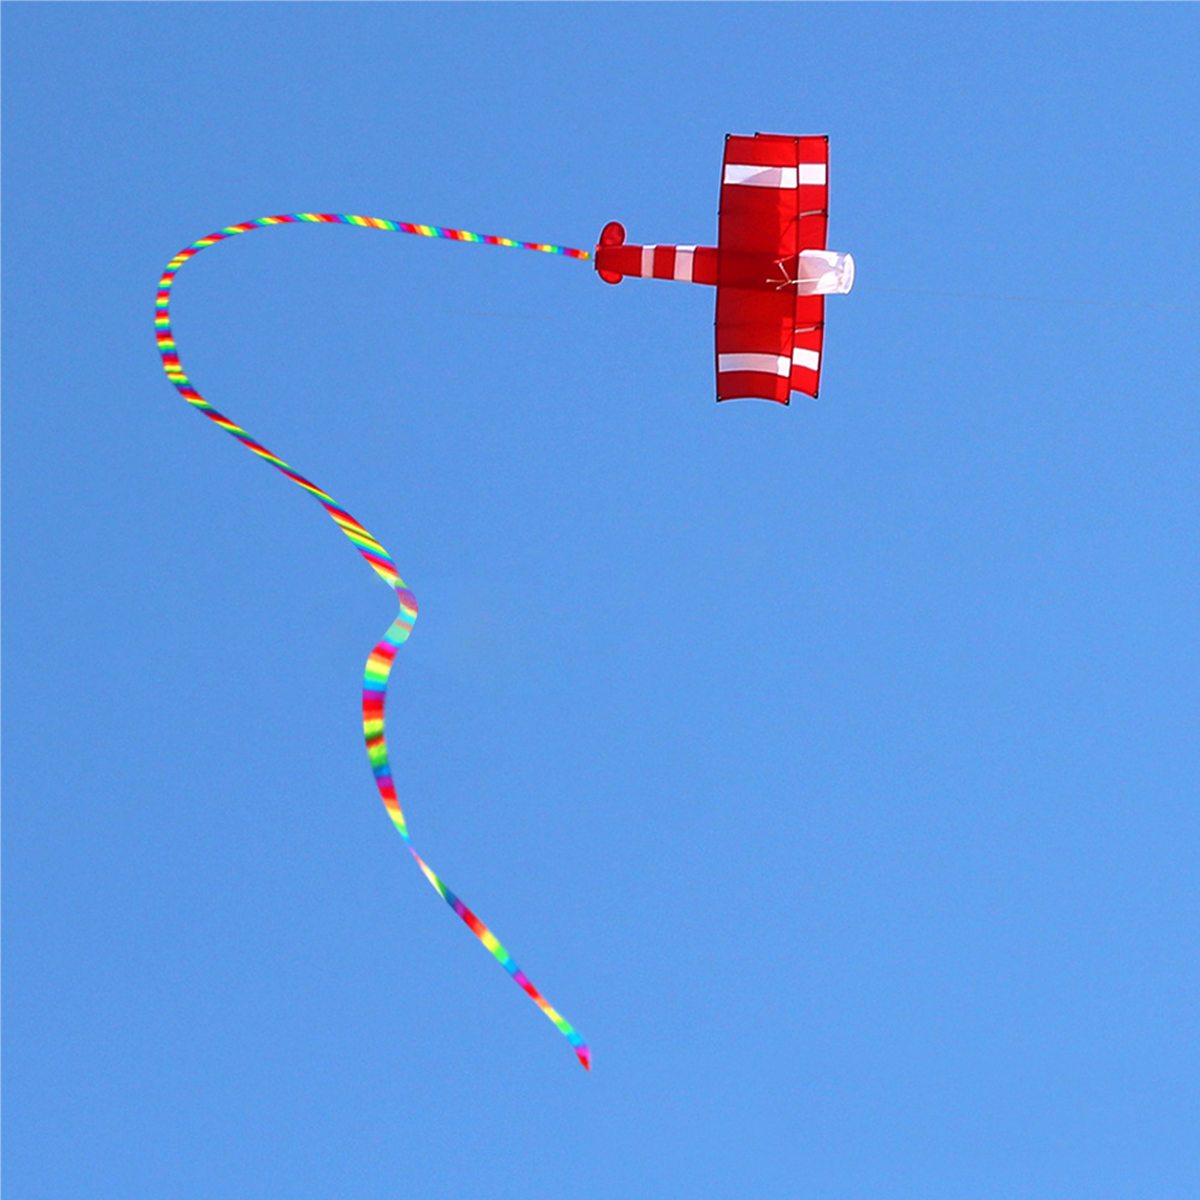 Colorful-3D-Aircraft-Kite-With-Handle-and-Line-Good-Flying-Gift-1610431-4